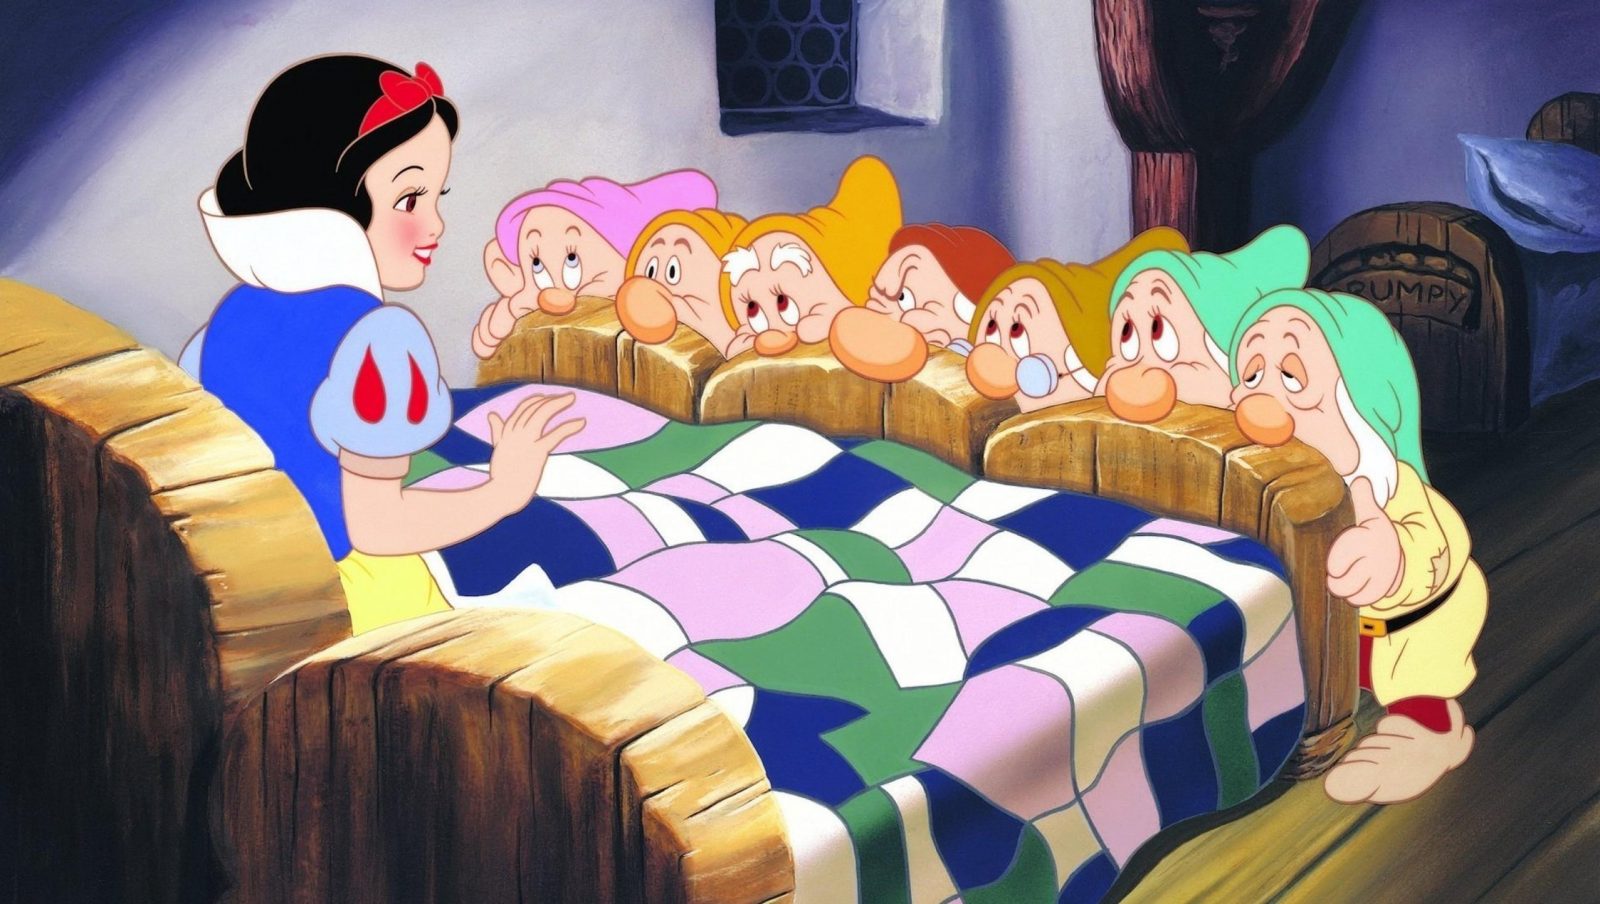 I Bet You Can’t Get 13/18 on This General Knowledge Quiz (feat. Disney) Snow White And The Seven Dwarfs 1937